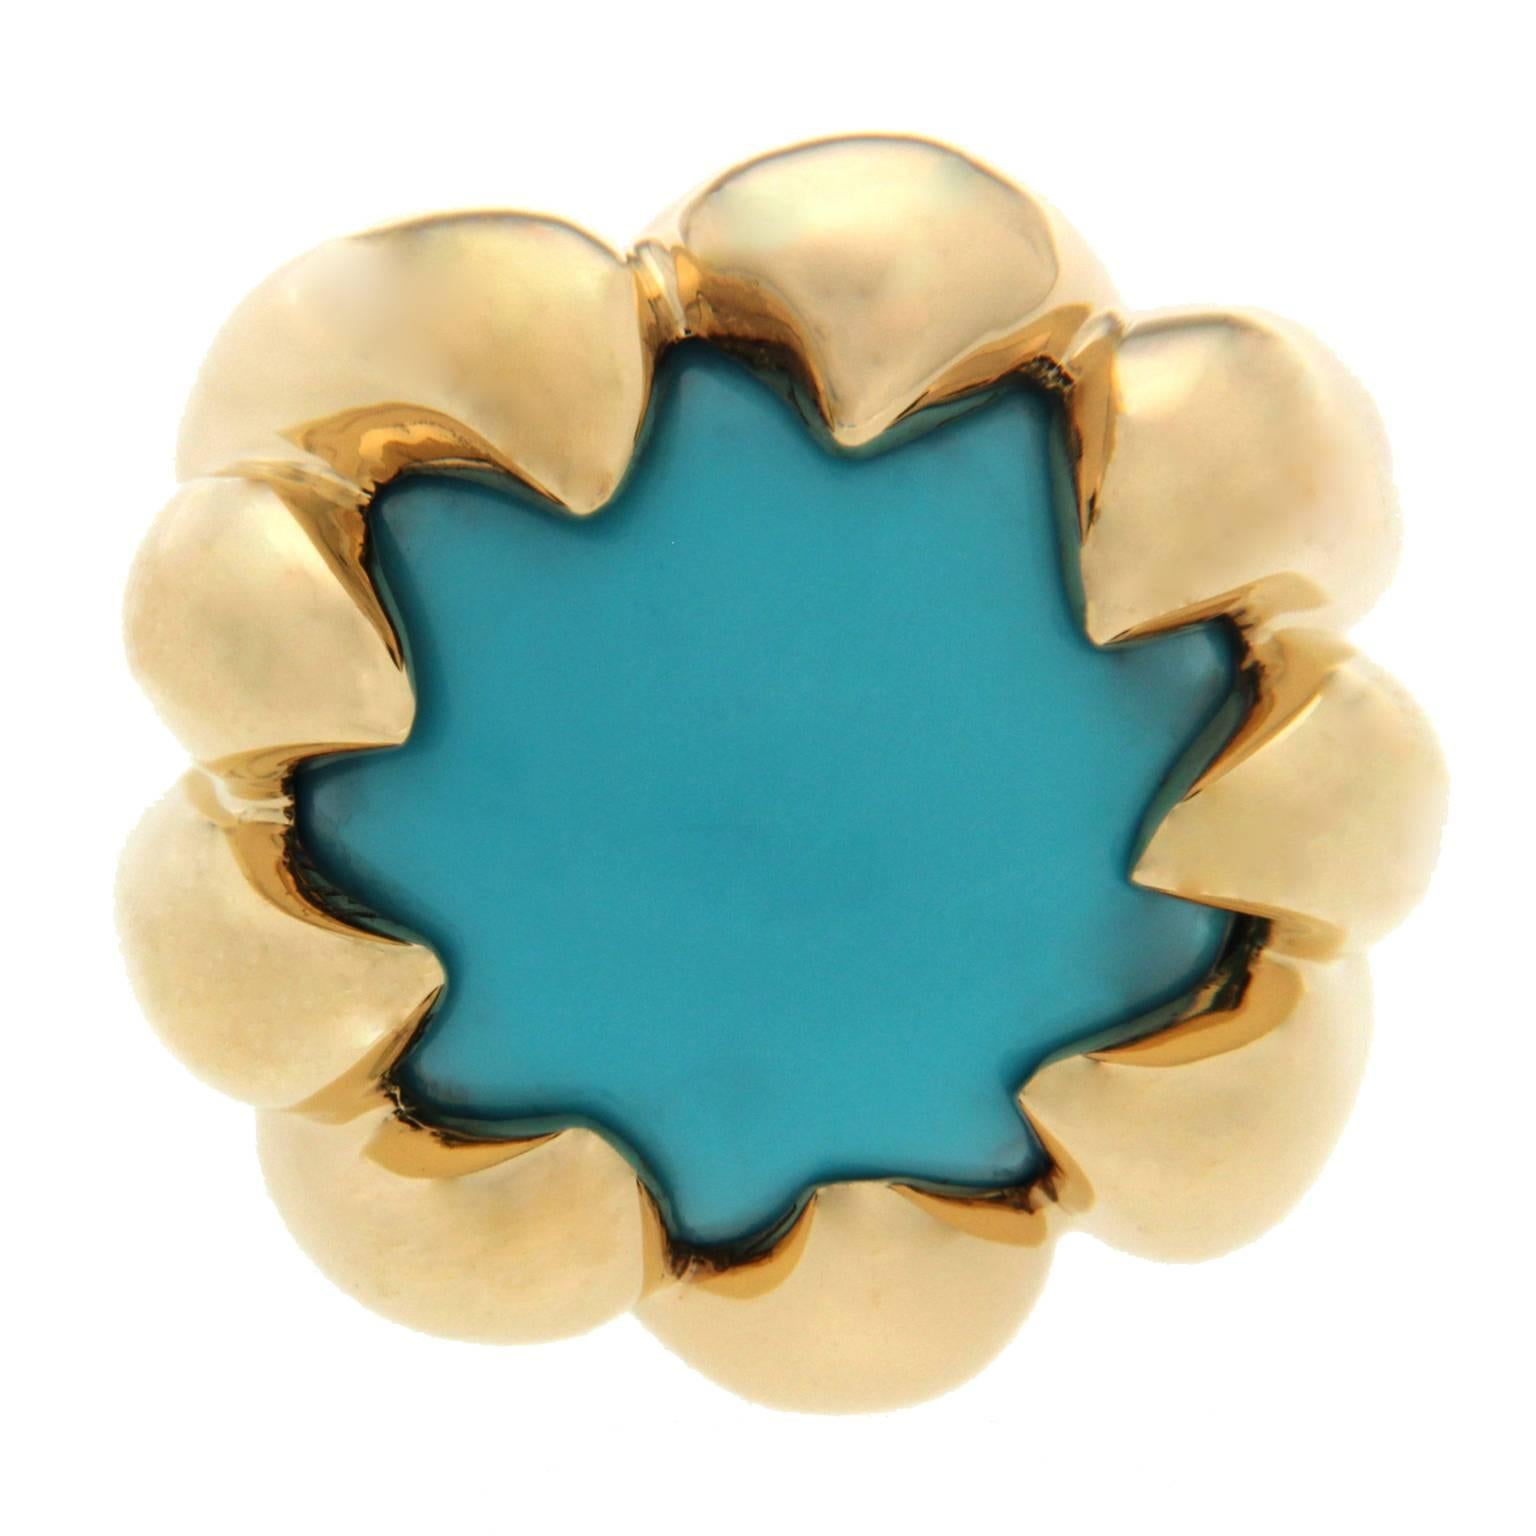 The ring is made in 18kt yellow gold and features a turquoise cabochon center stone. 